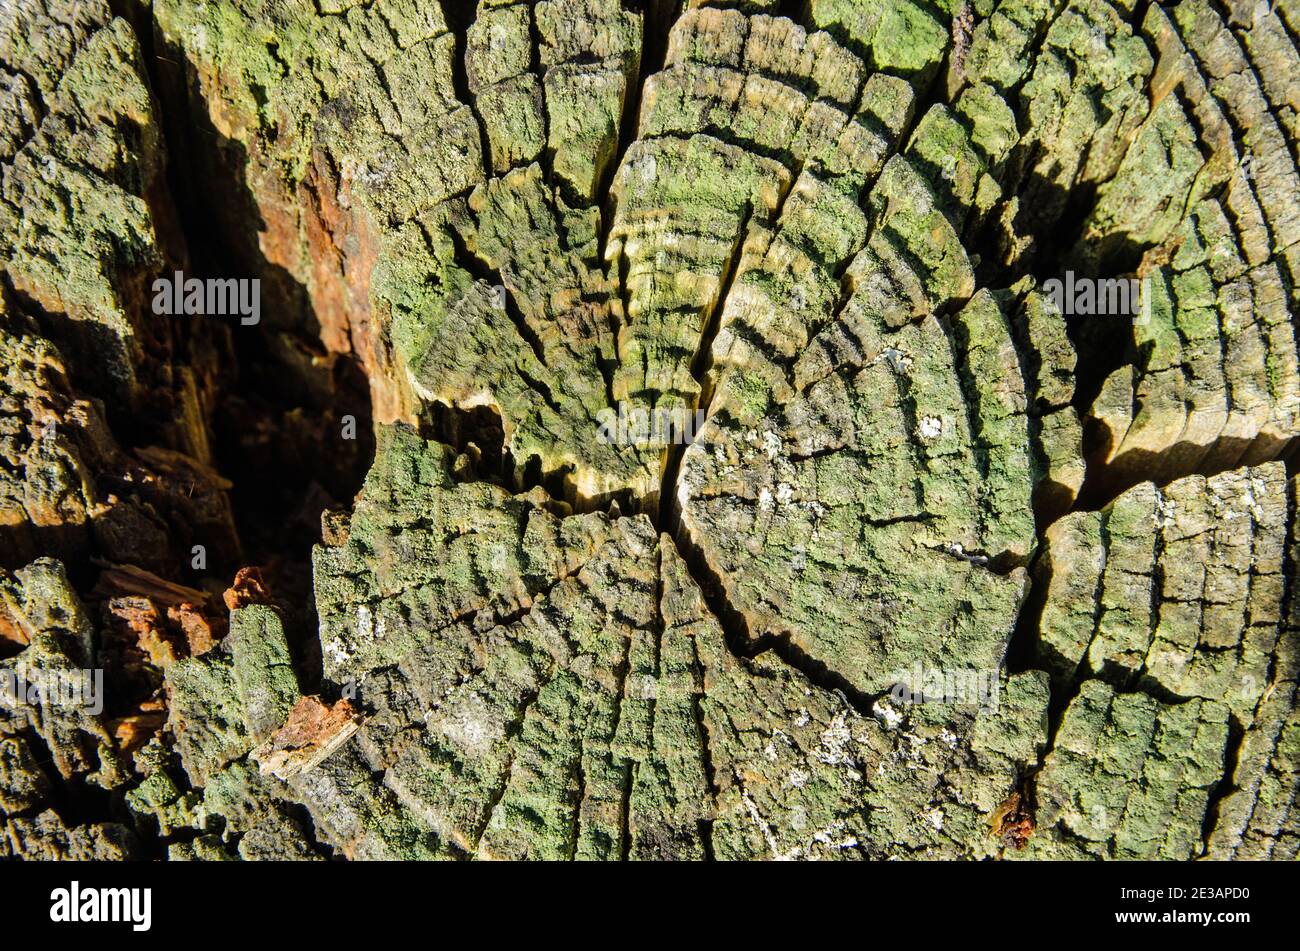 Close up view of a sawn log with lots of tree rings weathered with lichen growing in between.  Sunny, winter view. Stock Photo